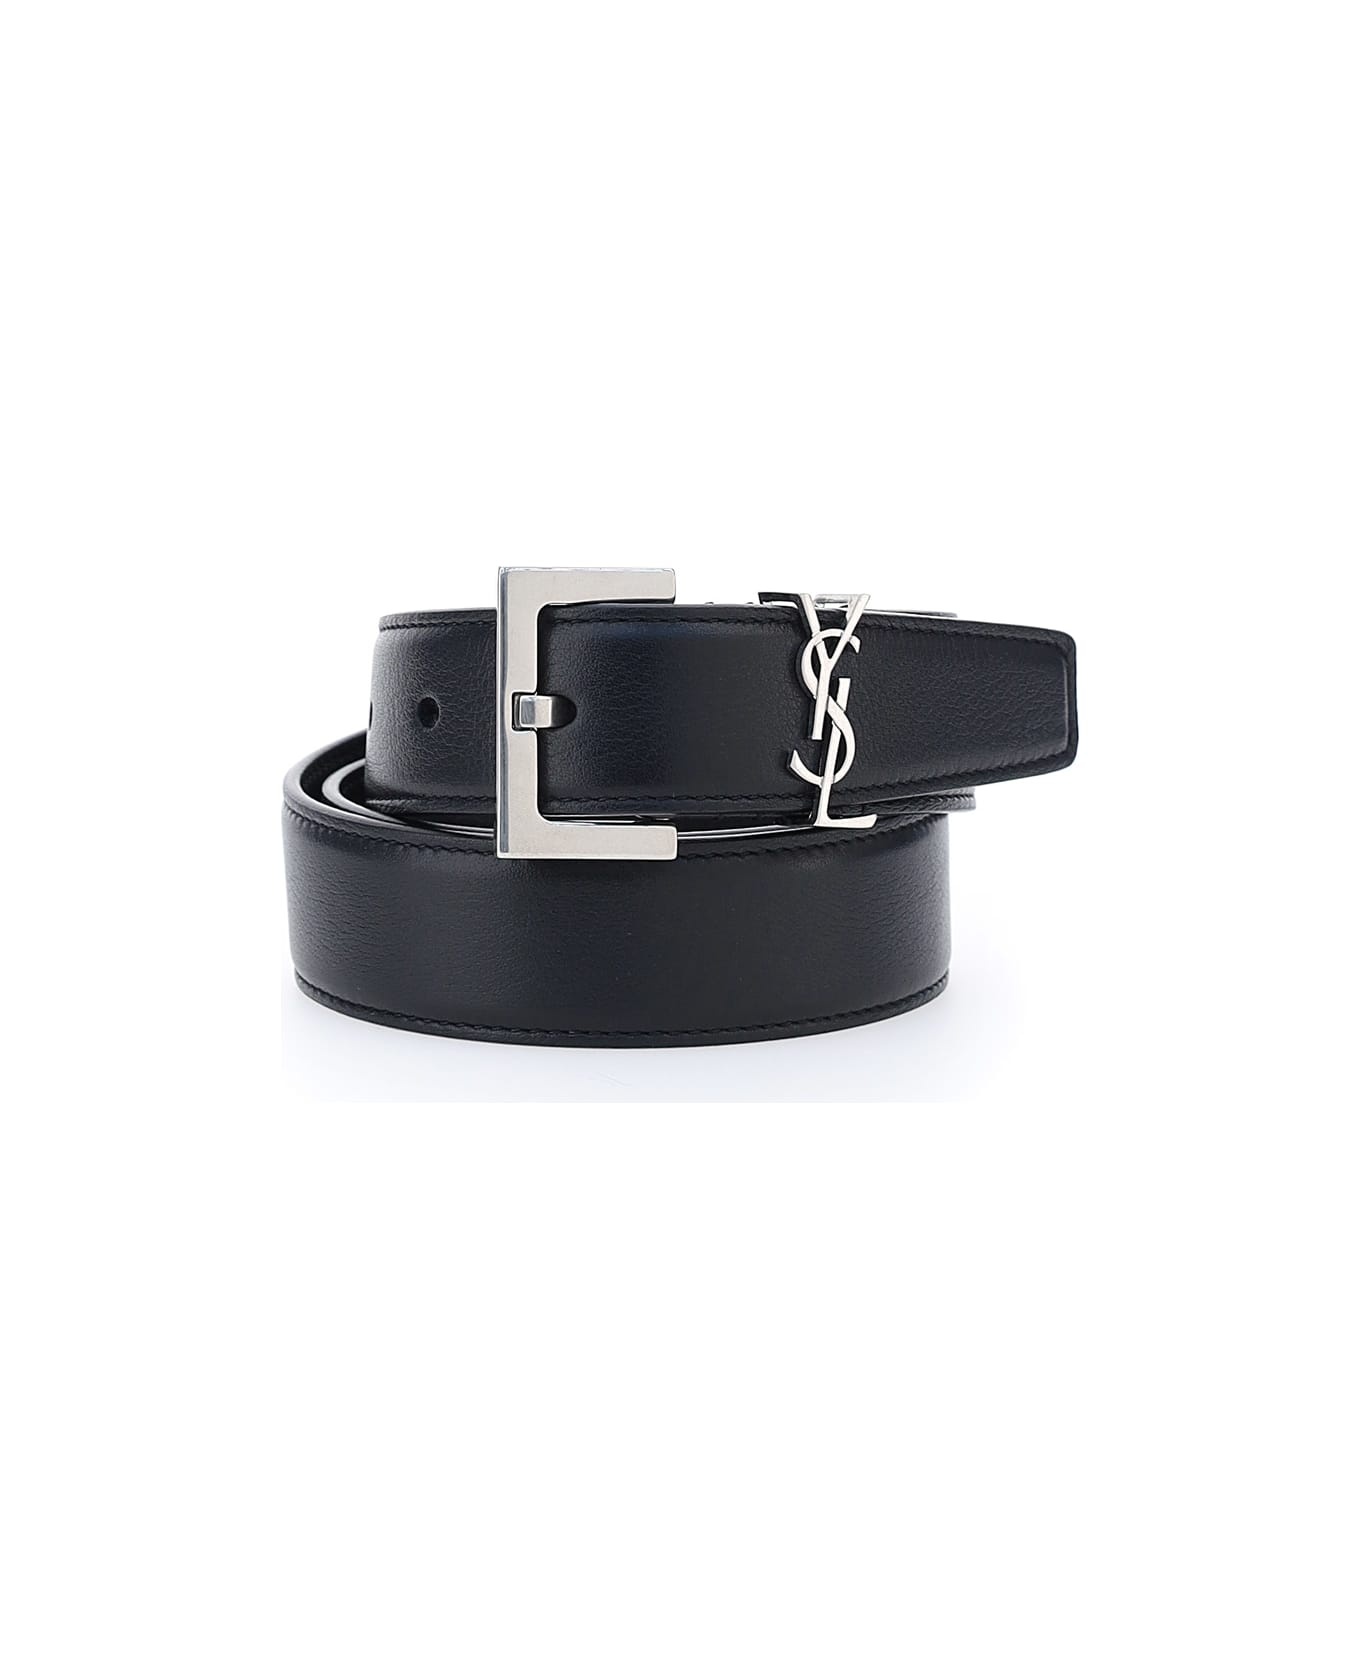 Black Leather Belt With Silver Logo - 1